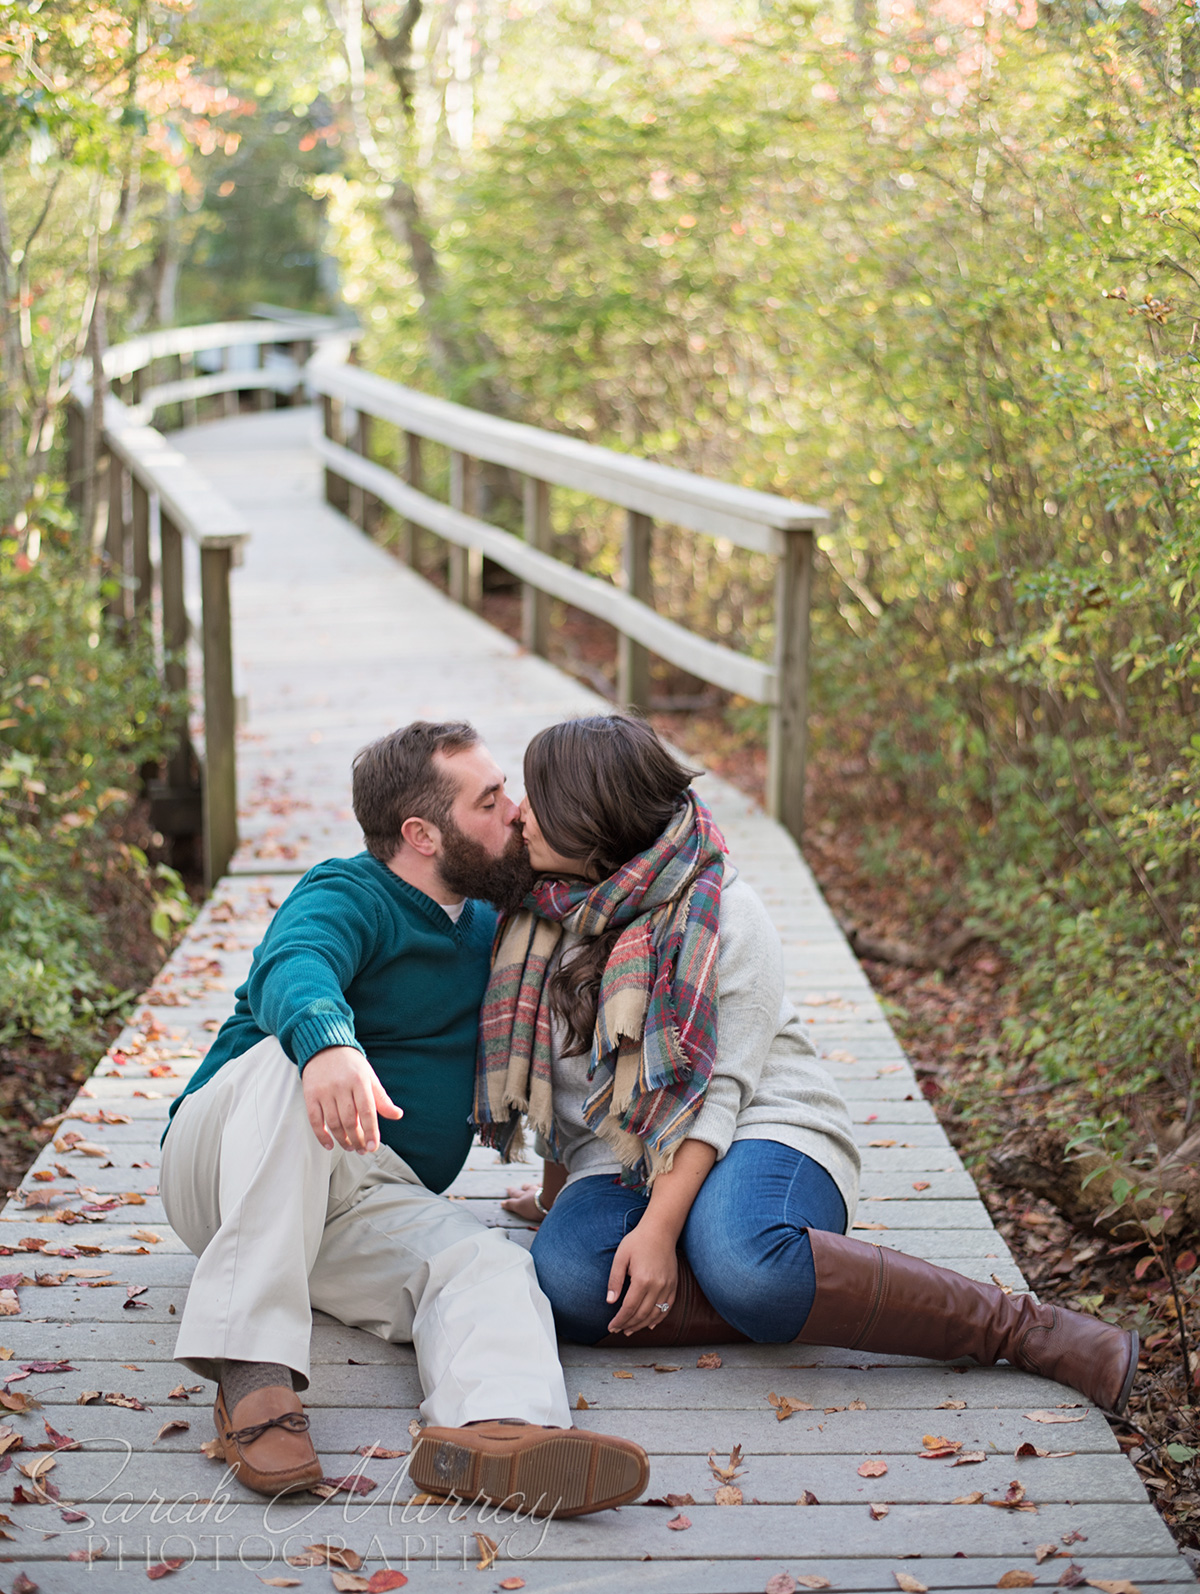 Beech Forest Trail Cape Cod Engagement Session in Provincetown, Massachusetts - Sarah Murray Photography